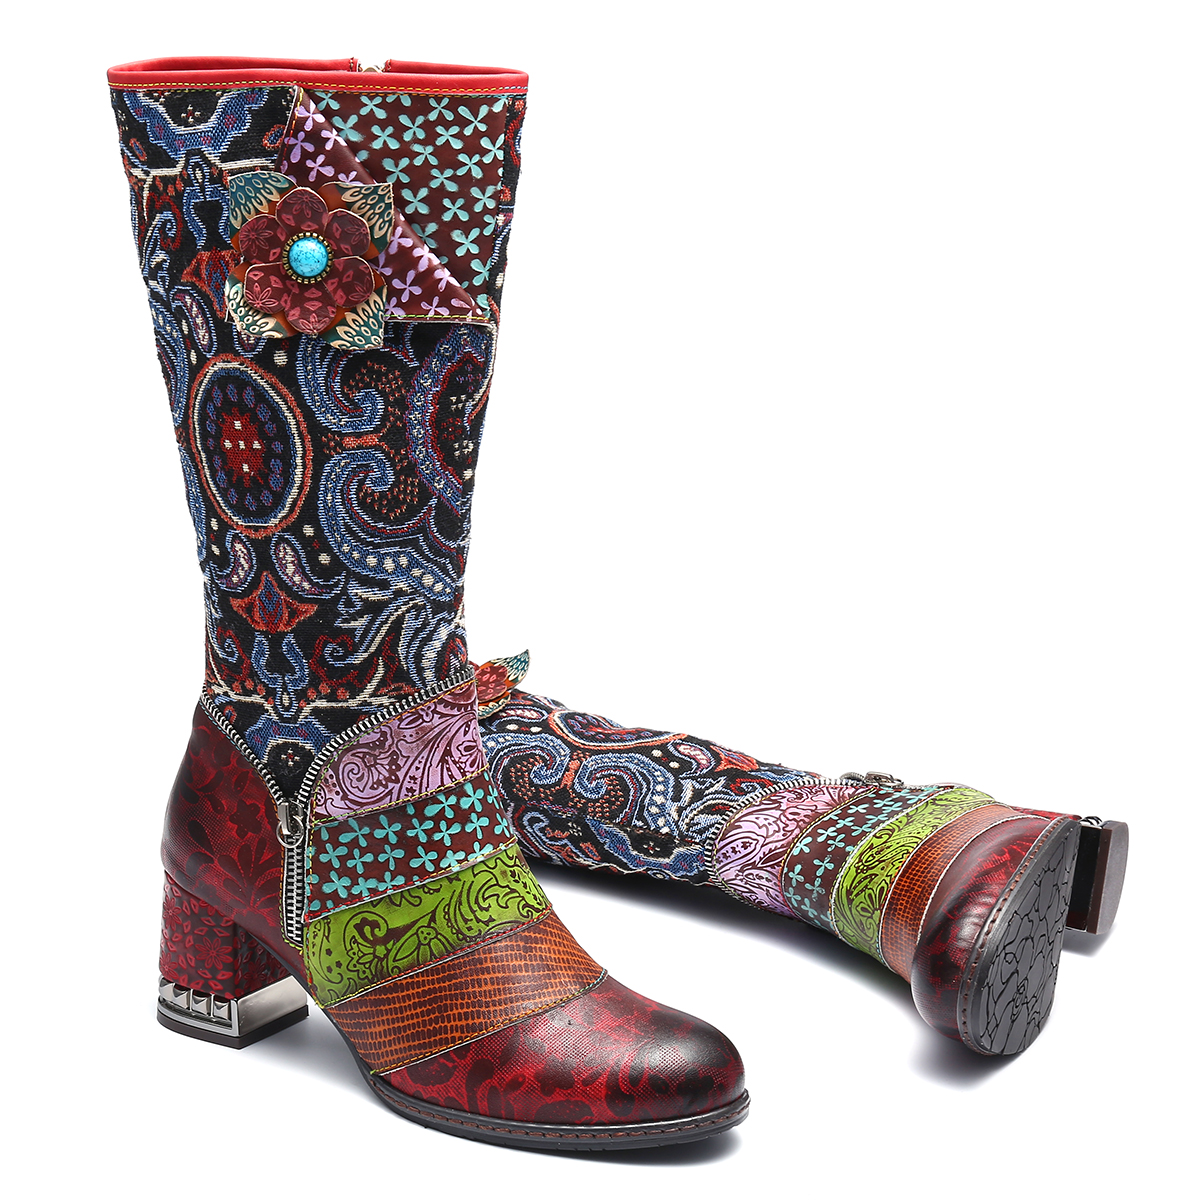 gracosy Handmade Bohemian Flower Pattern Leather Fur Lined Knee High Boots